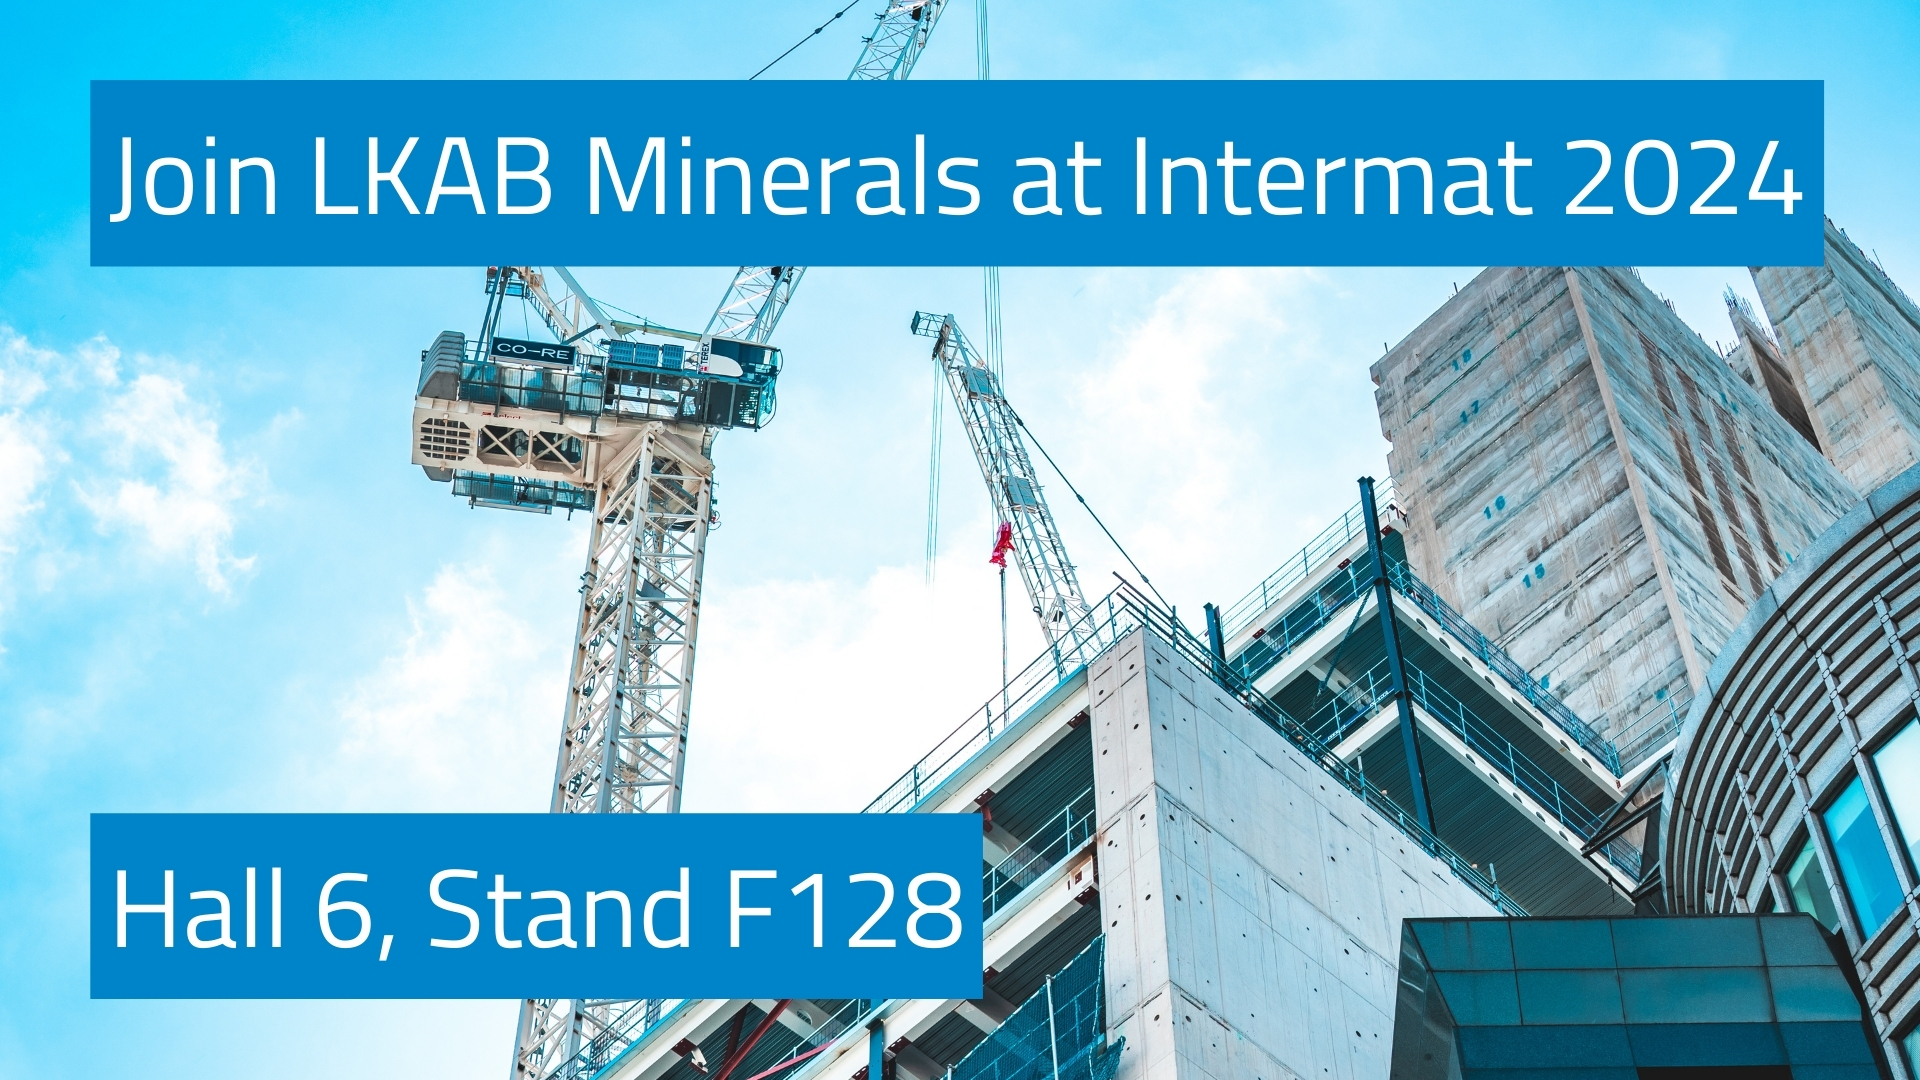 Join LKAB Minerals at Intermat in Hall 6 on Stand F128